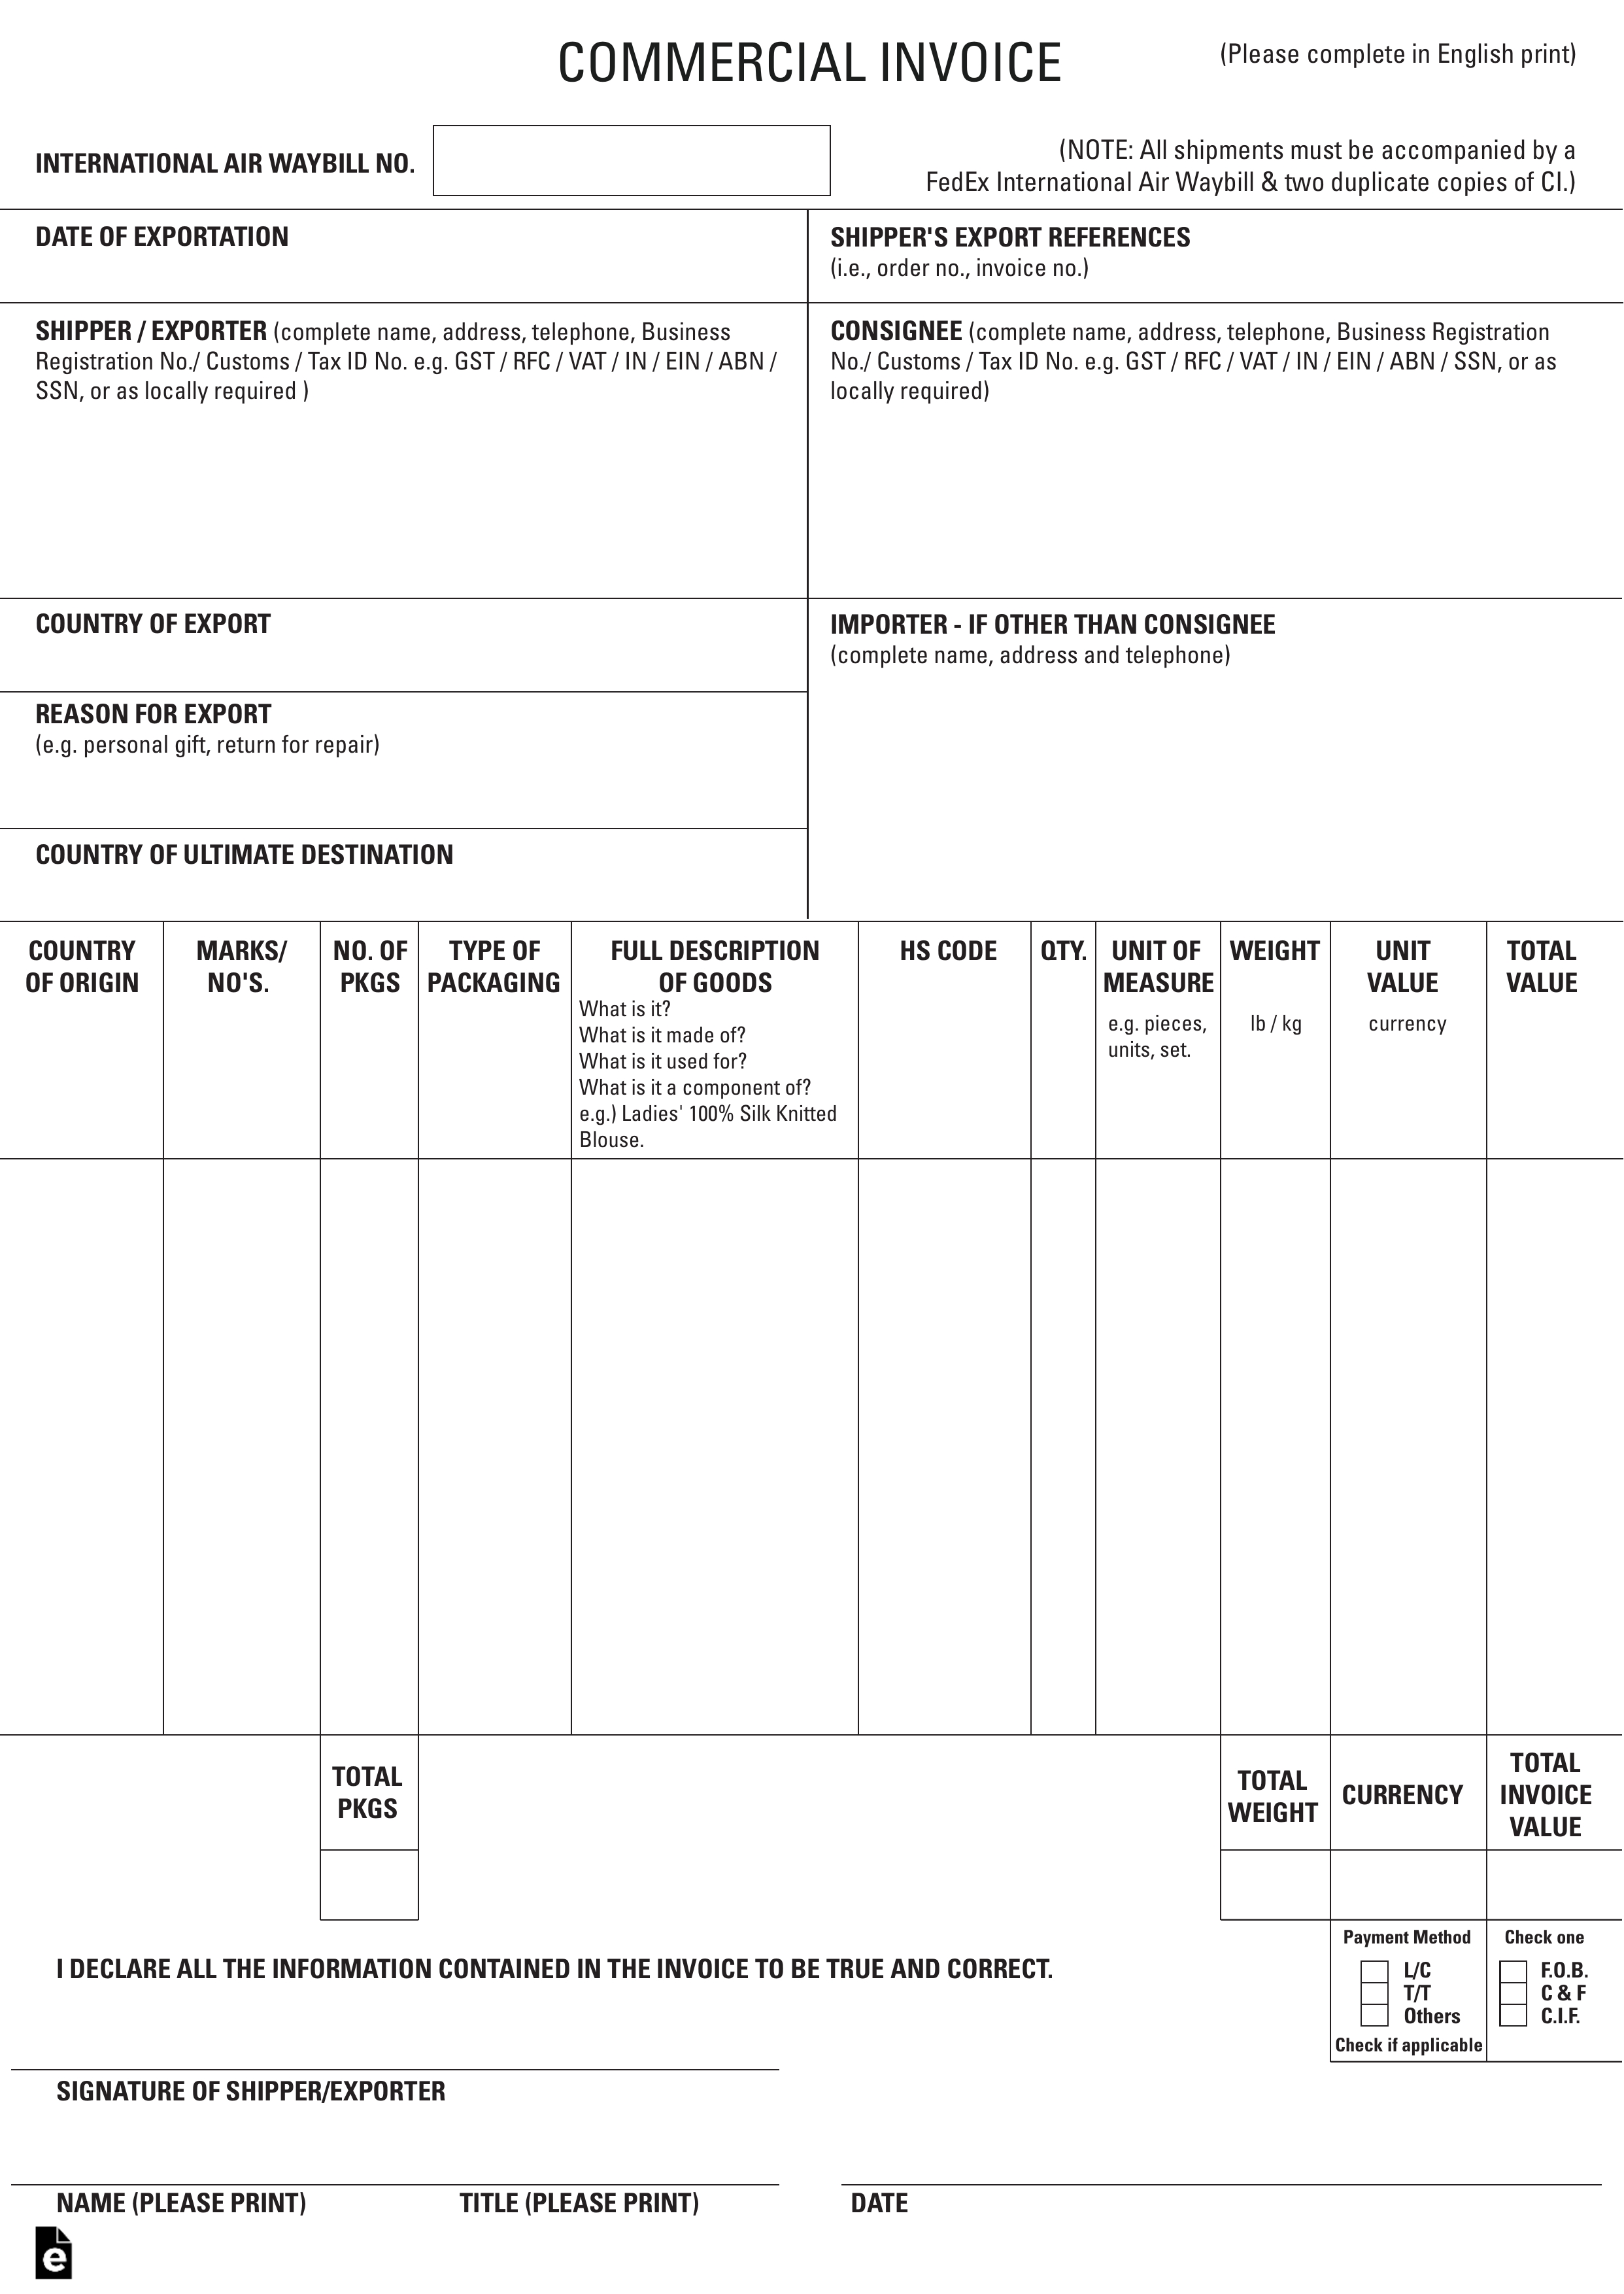 free international commercial invoice templates pdf export commercial invoice requirements